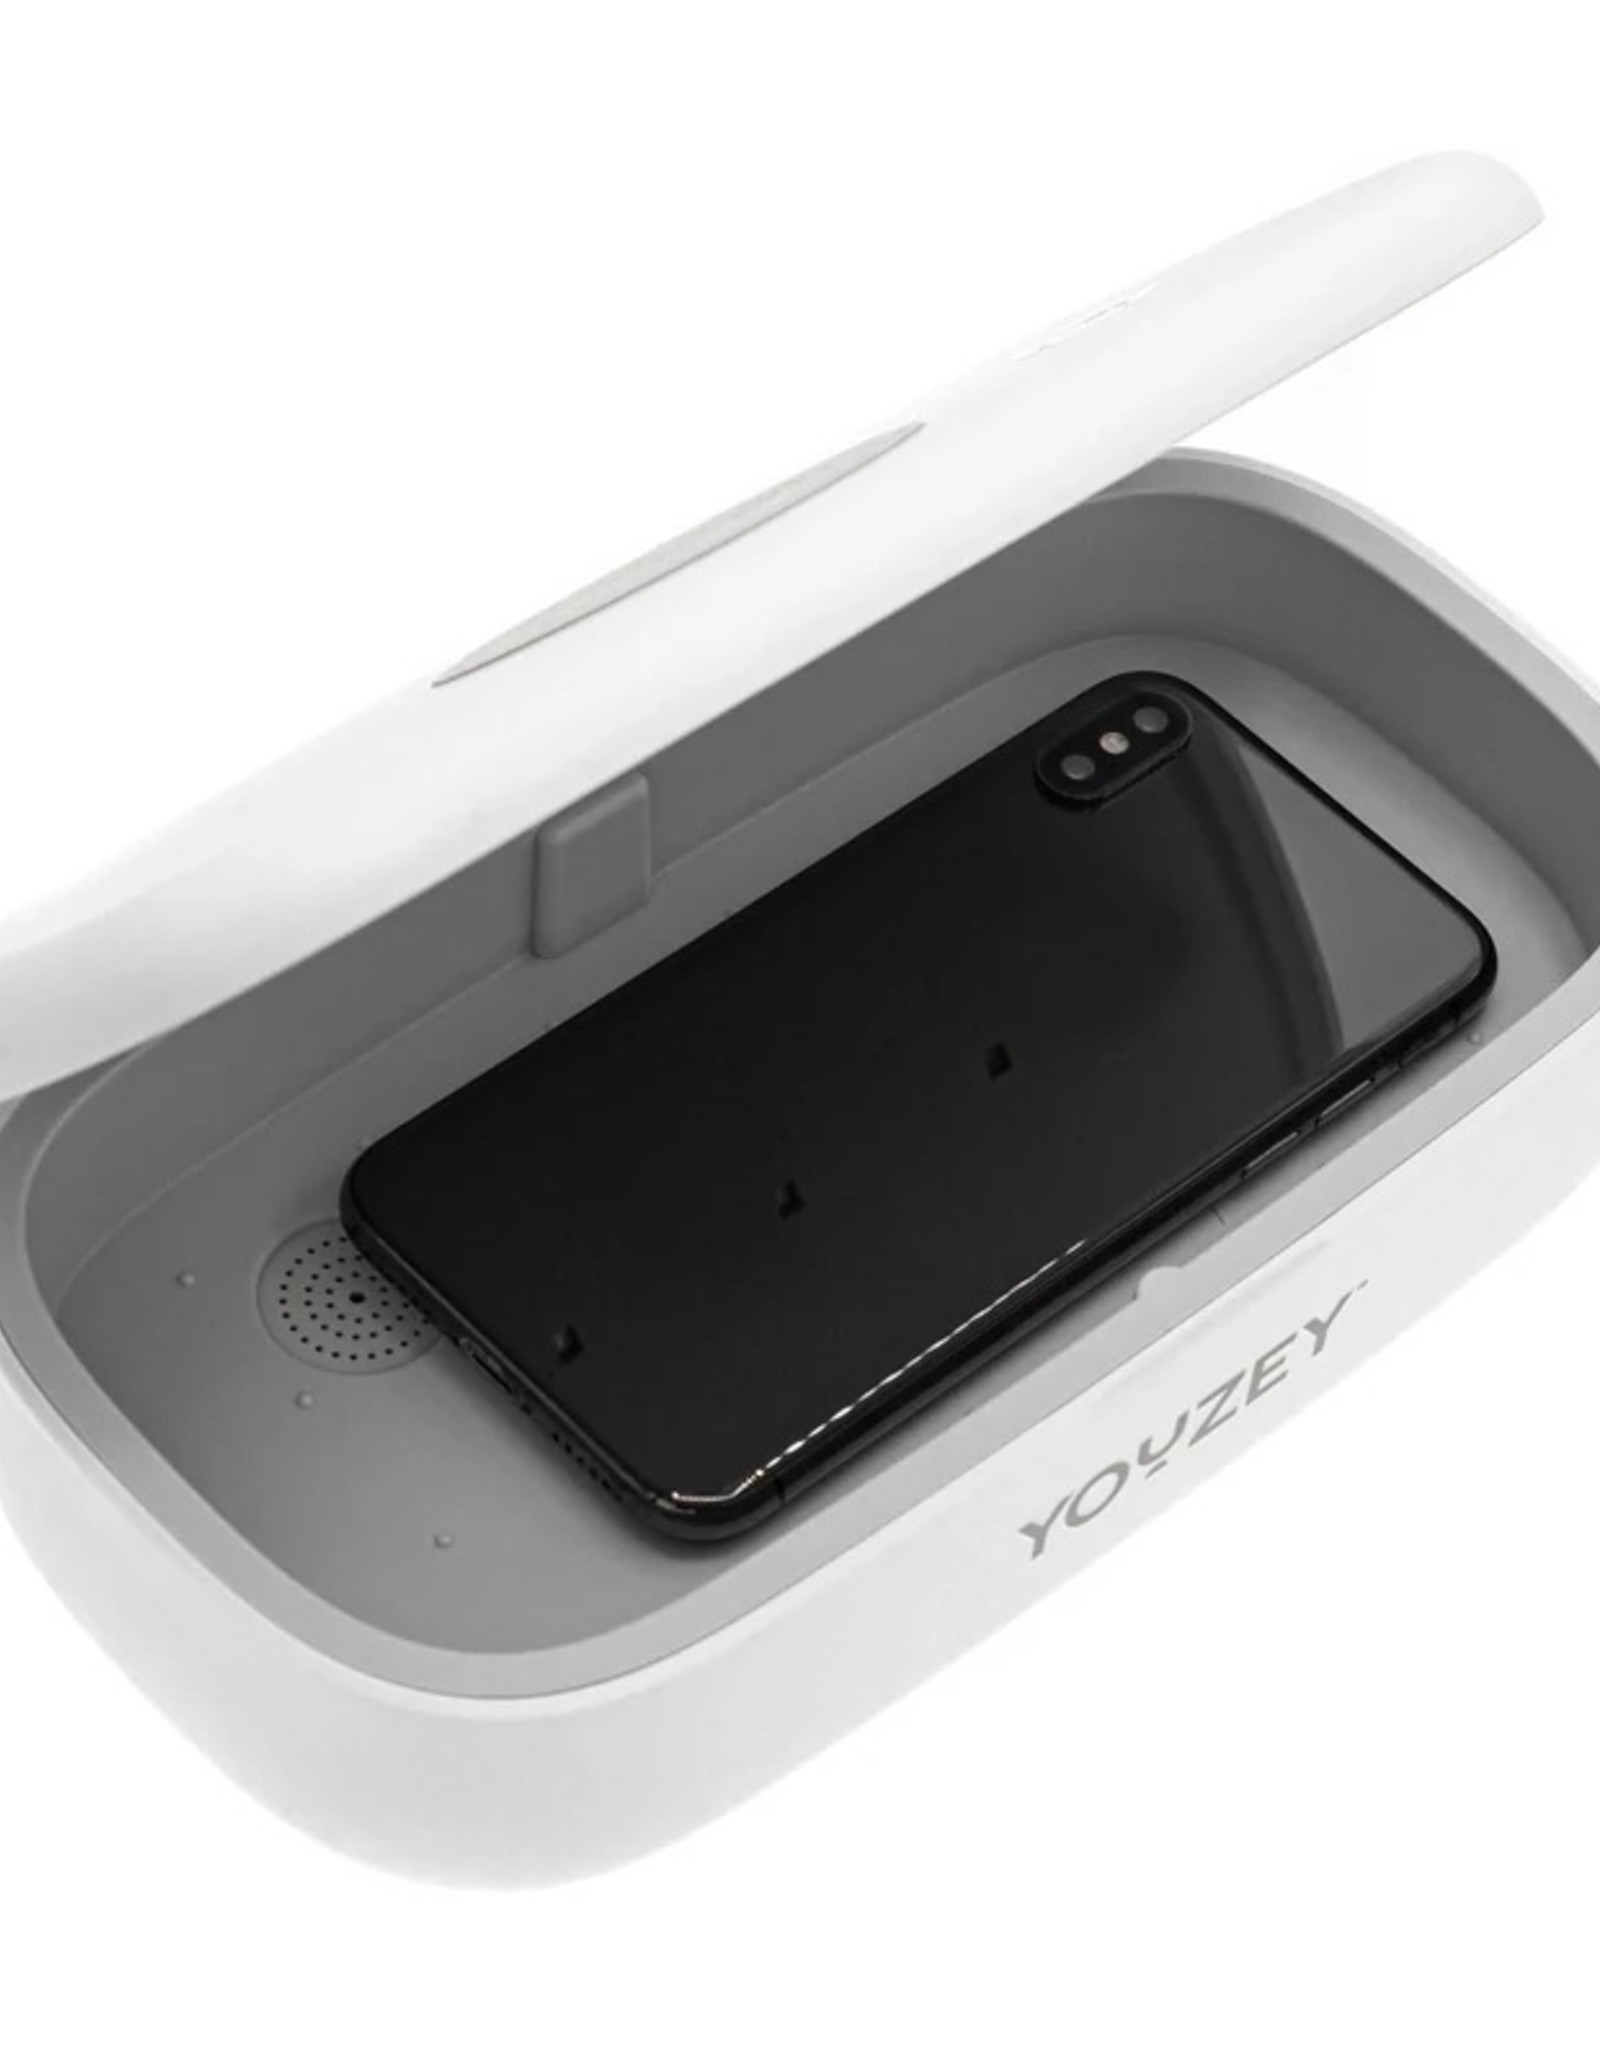 Youzey Cell Phone Sterilizer & Wireless Charger